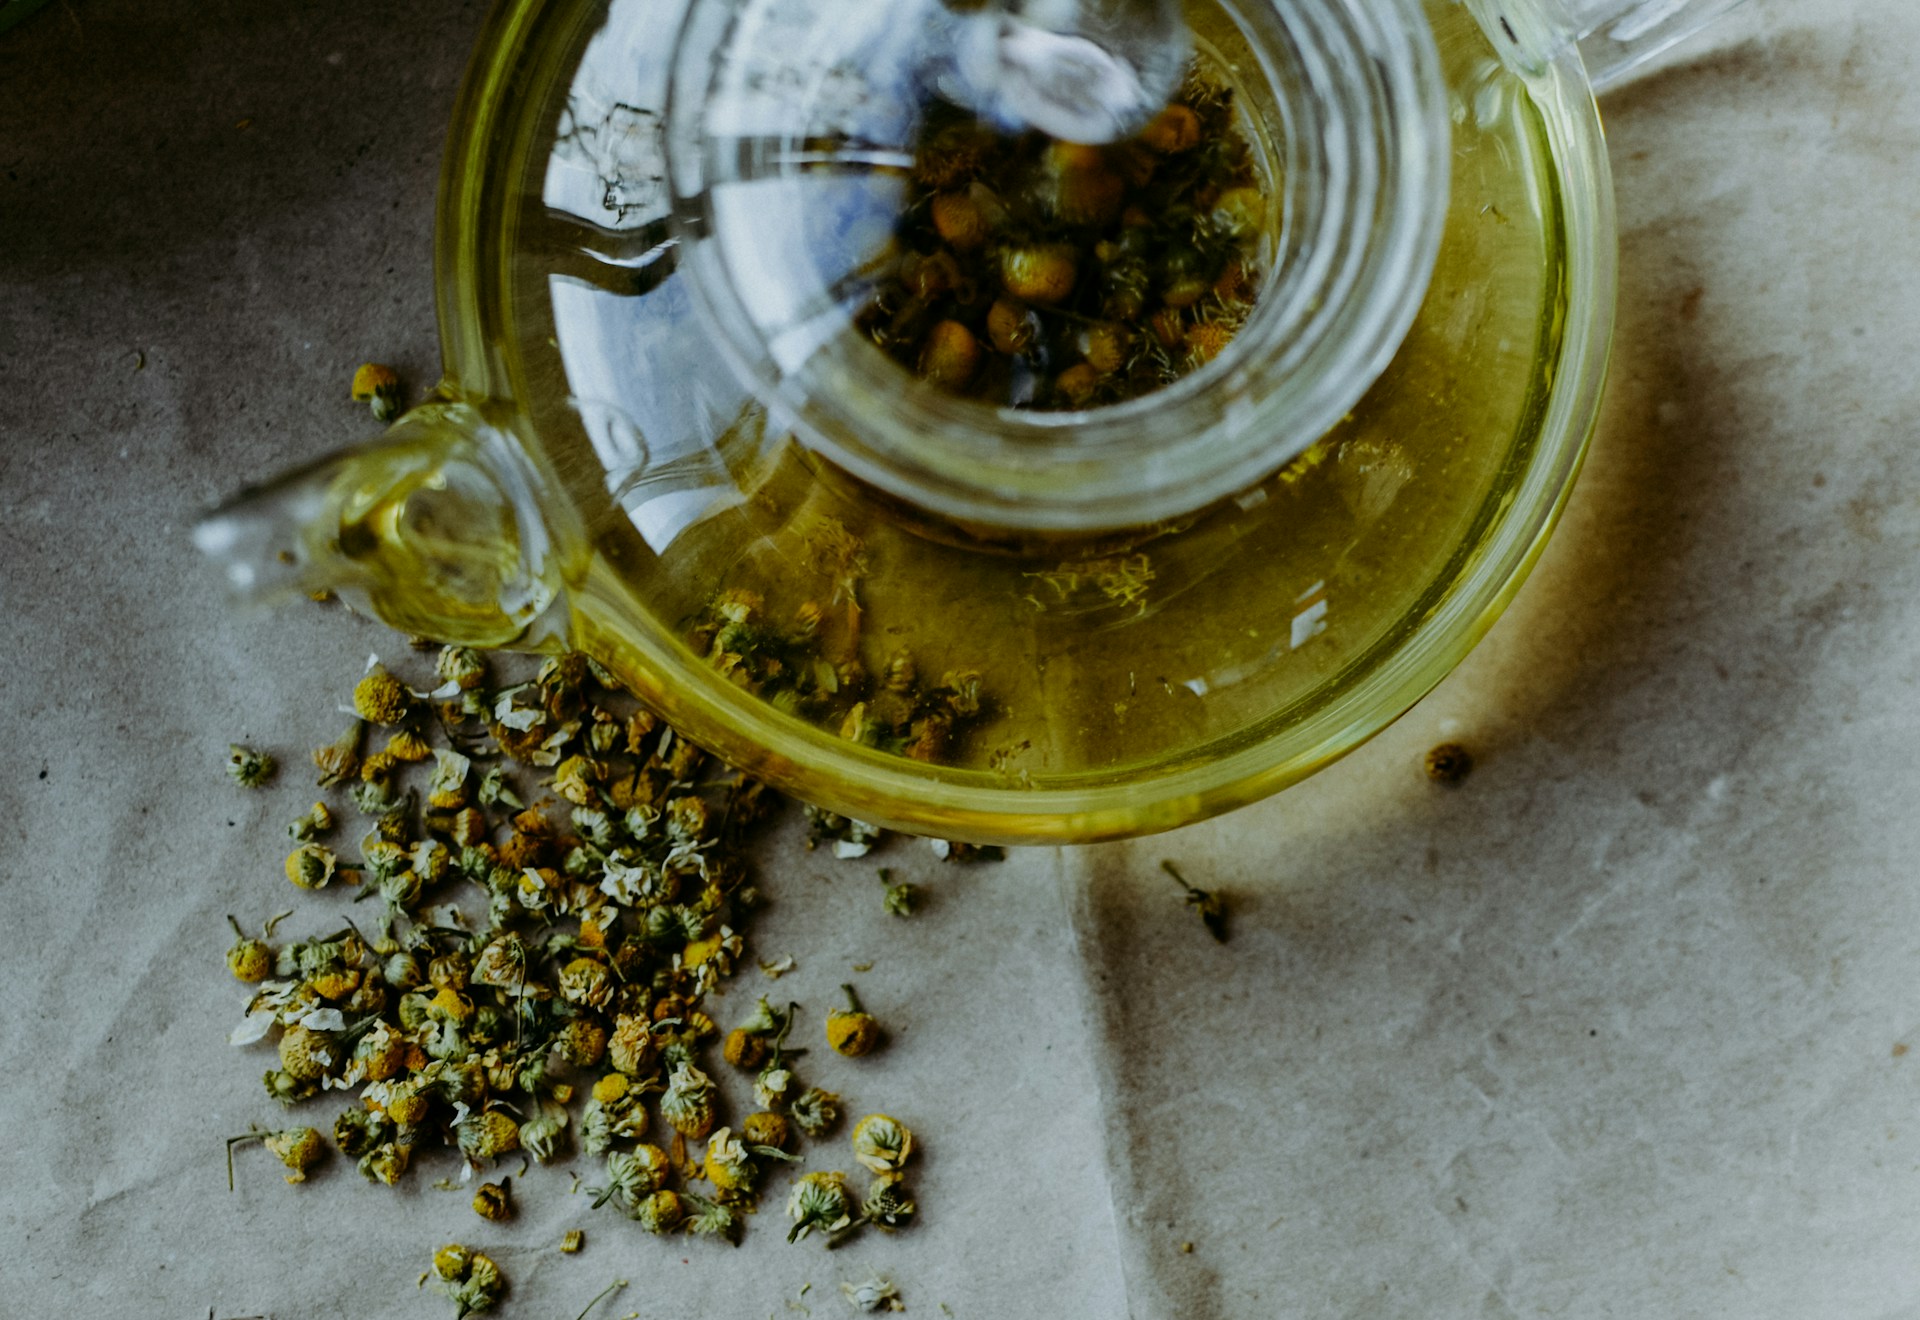 Chamomile: The Soothing Secret to Natural Wellness| Herbal Goodness